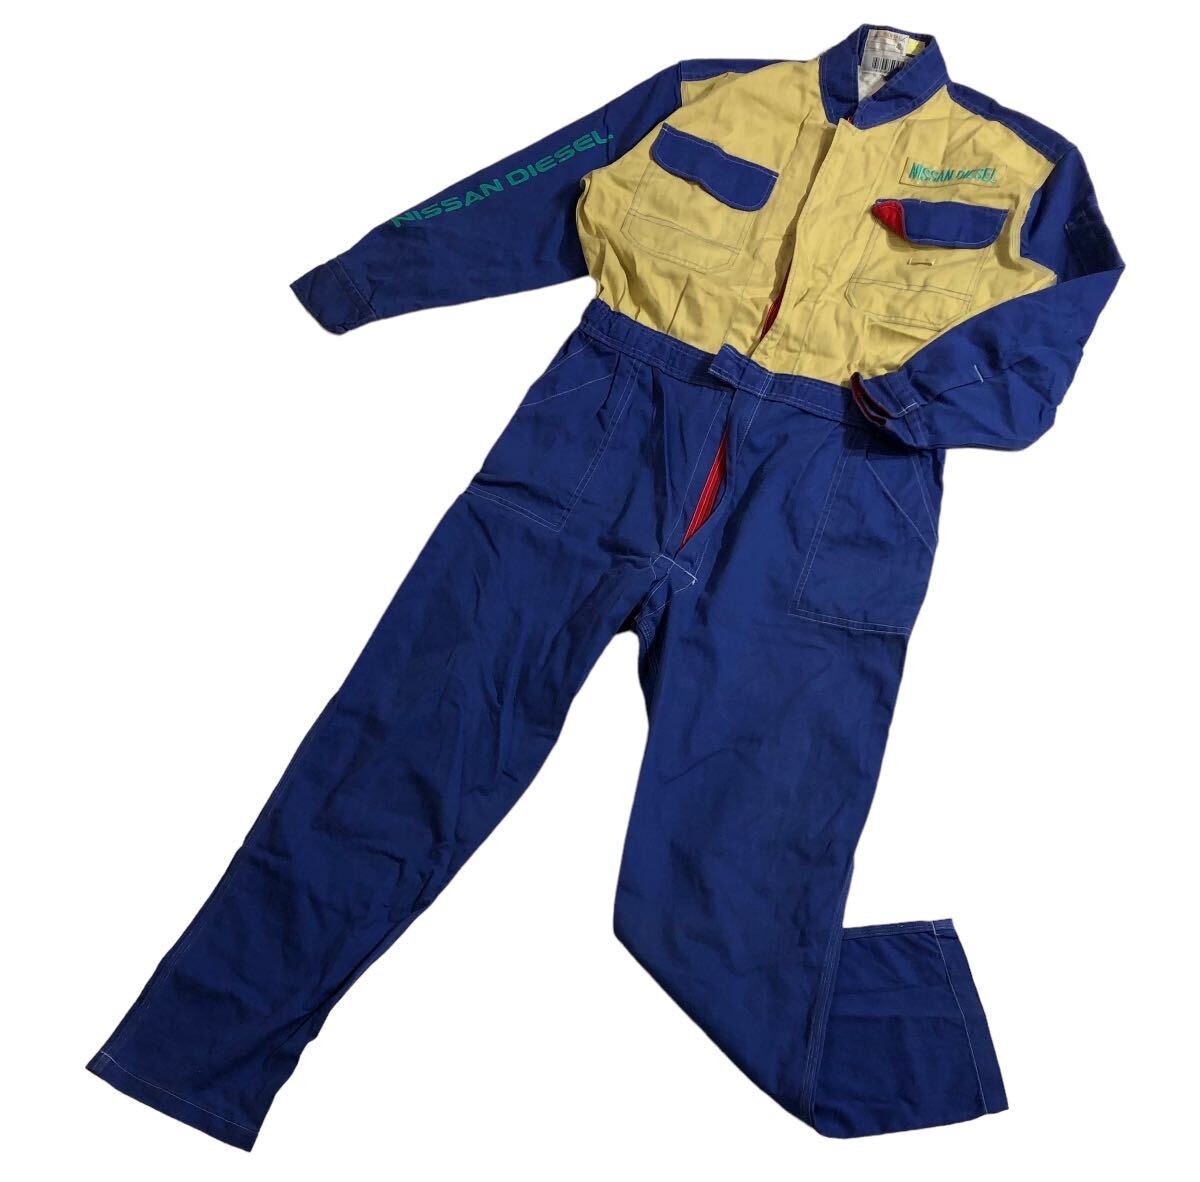  large size # Nissan NISSAN Nissan # Logo embroidery print mechanism nik suit coverall coveralls all-in-one blue × beige 4L